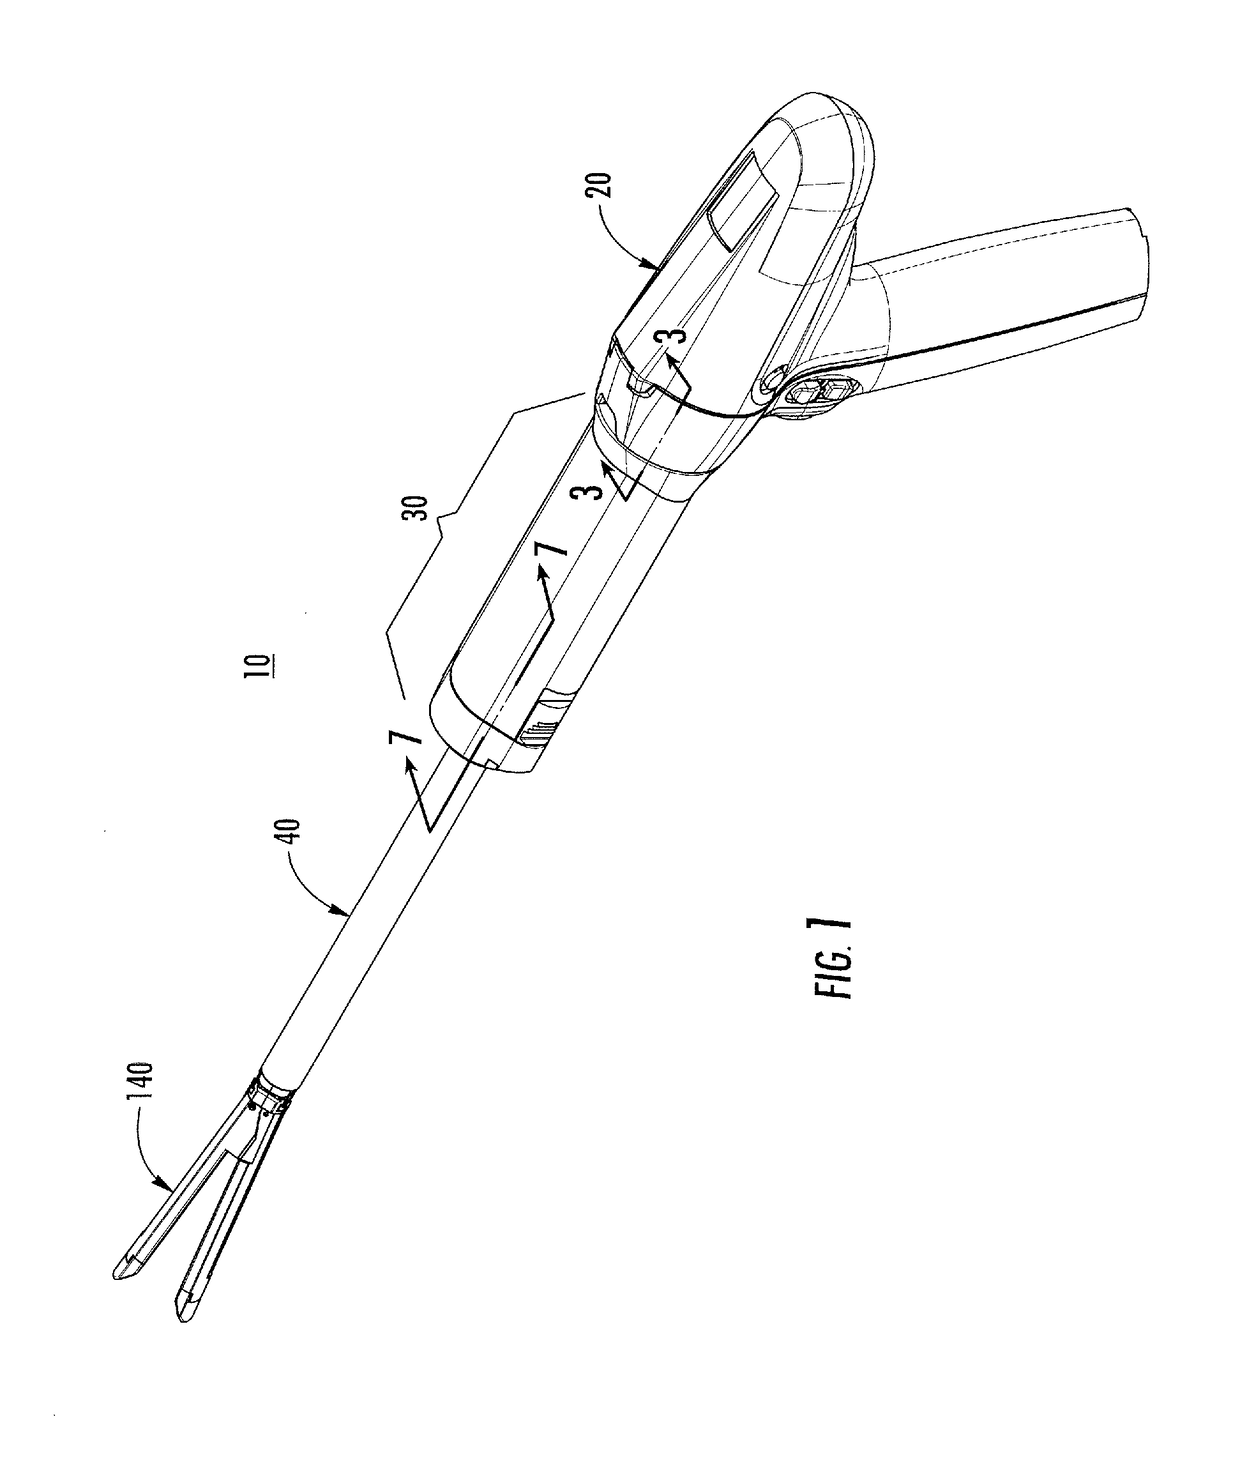 Non-contact surgical adapter electrical interface